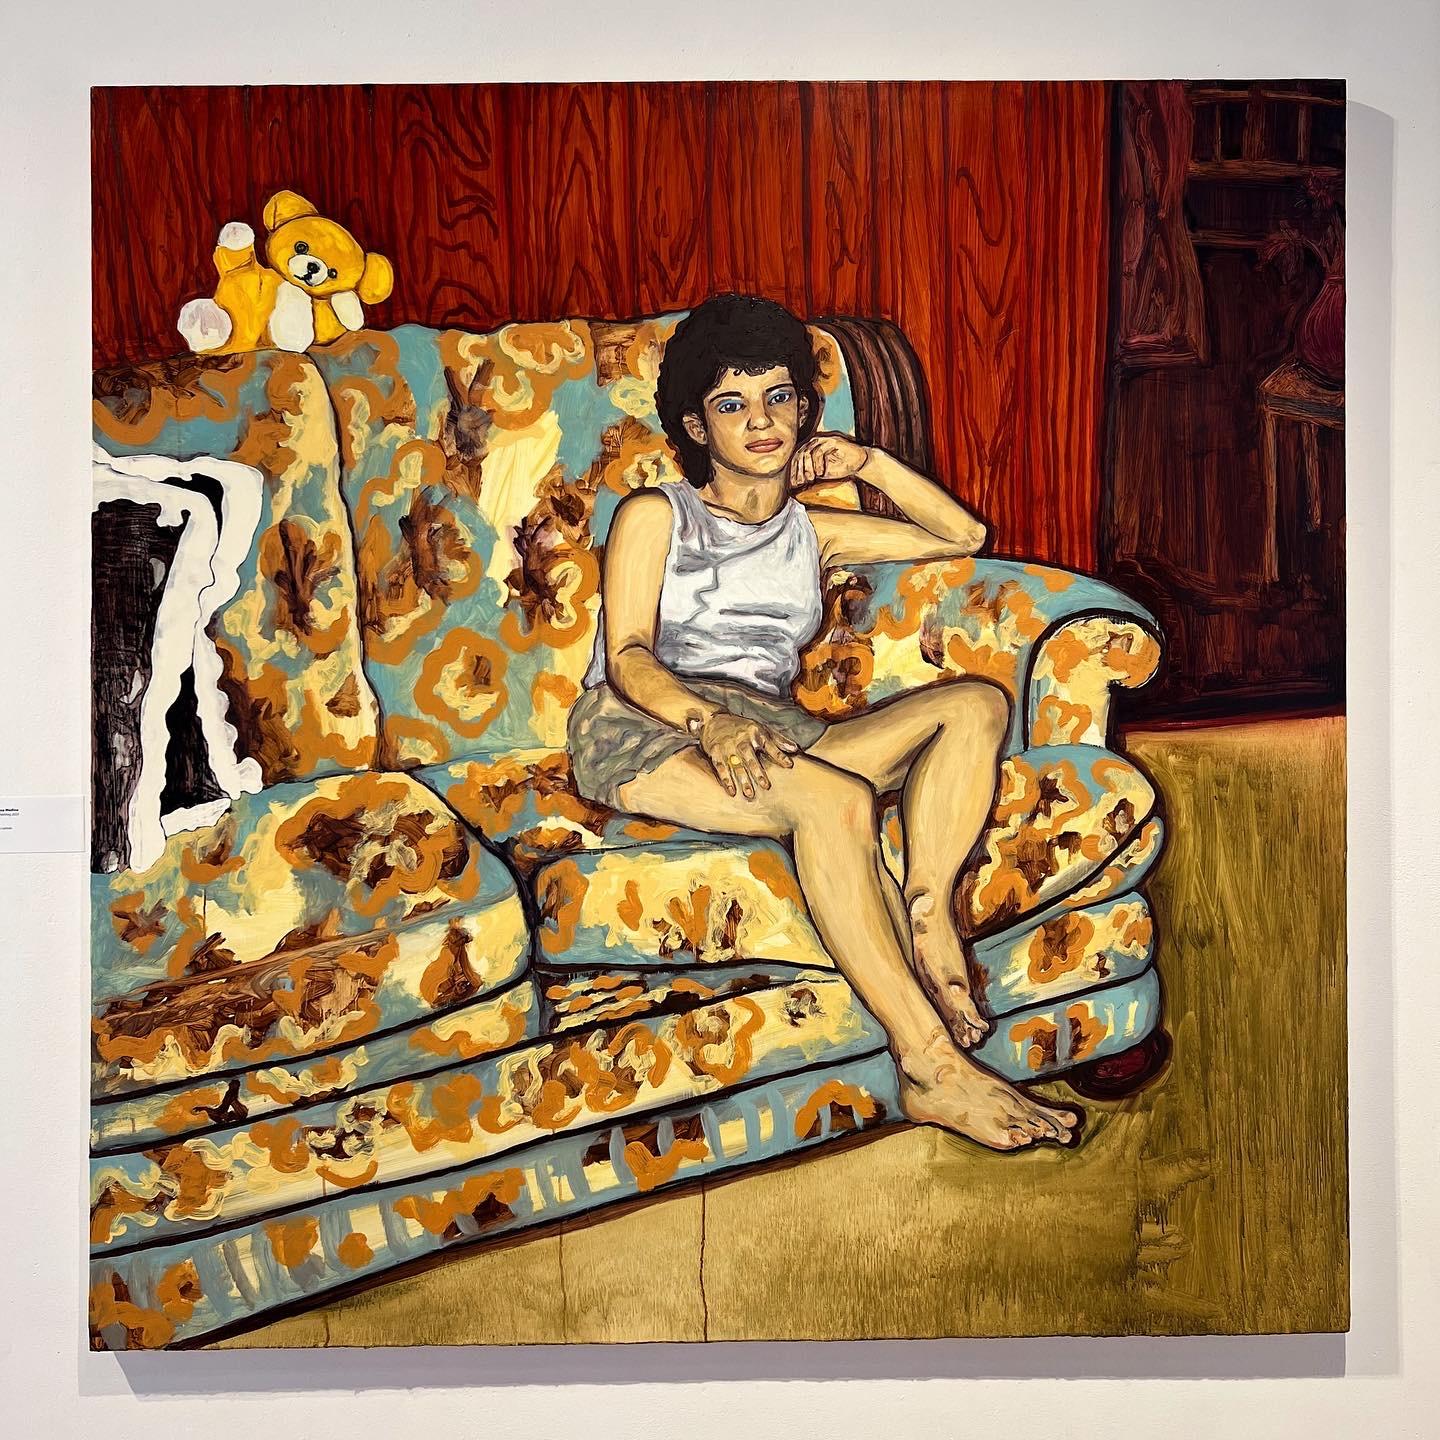 A female figure sitting on a floral couch